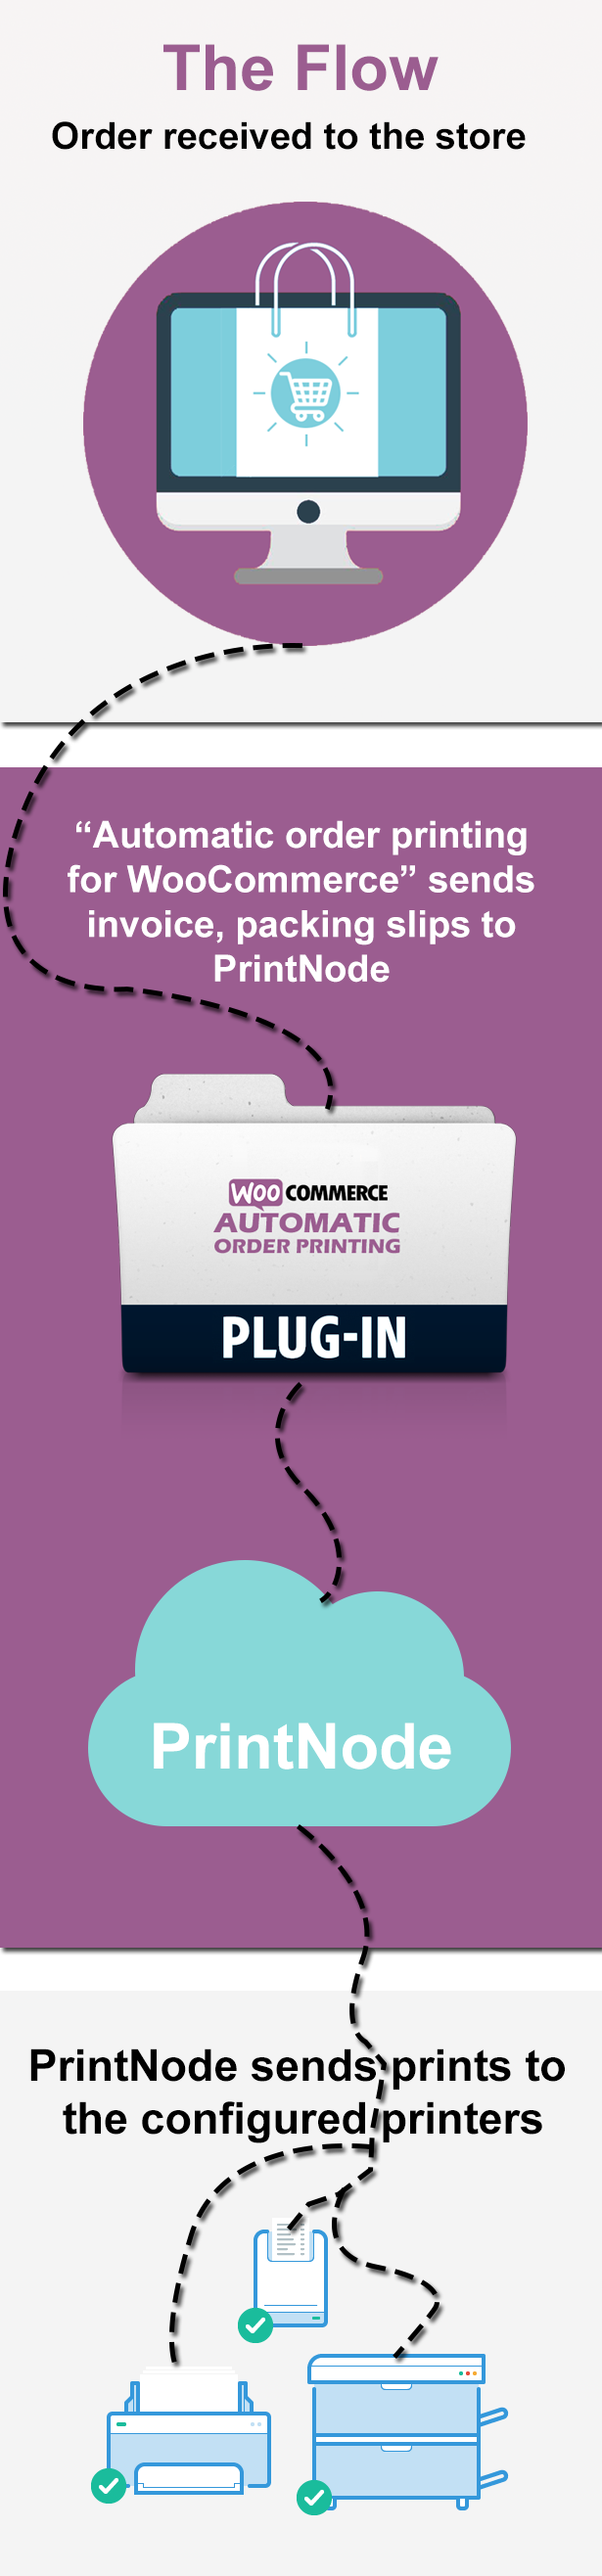 Woocommerce automatic order printing features